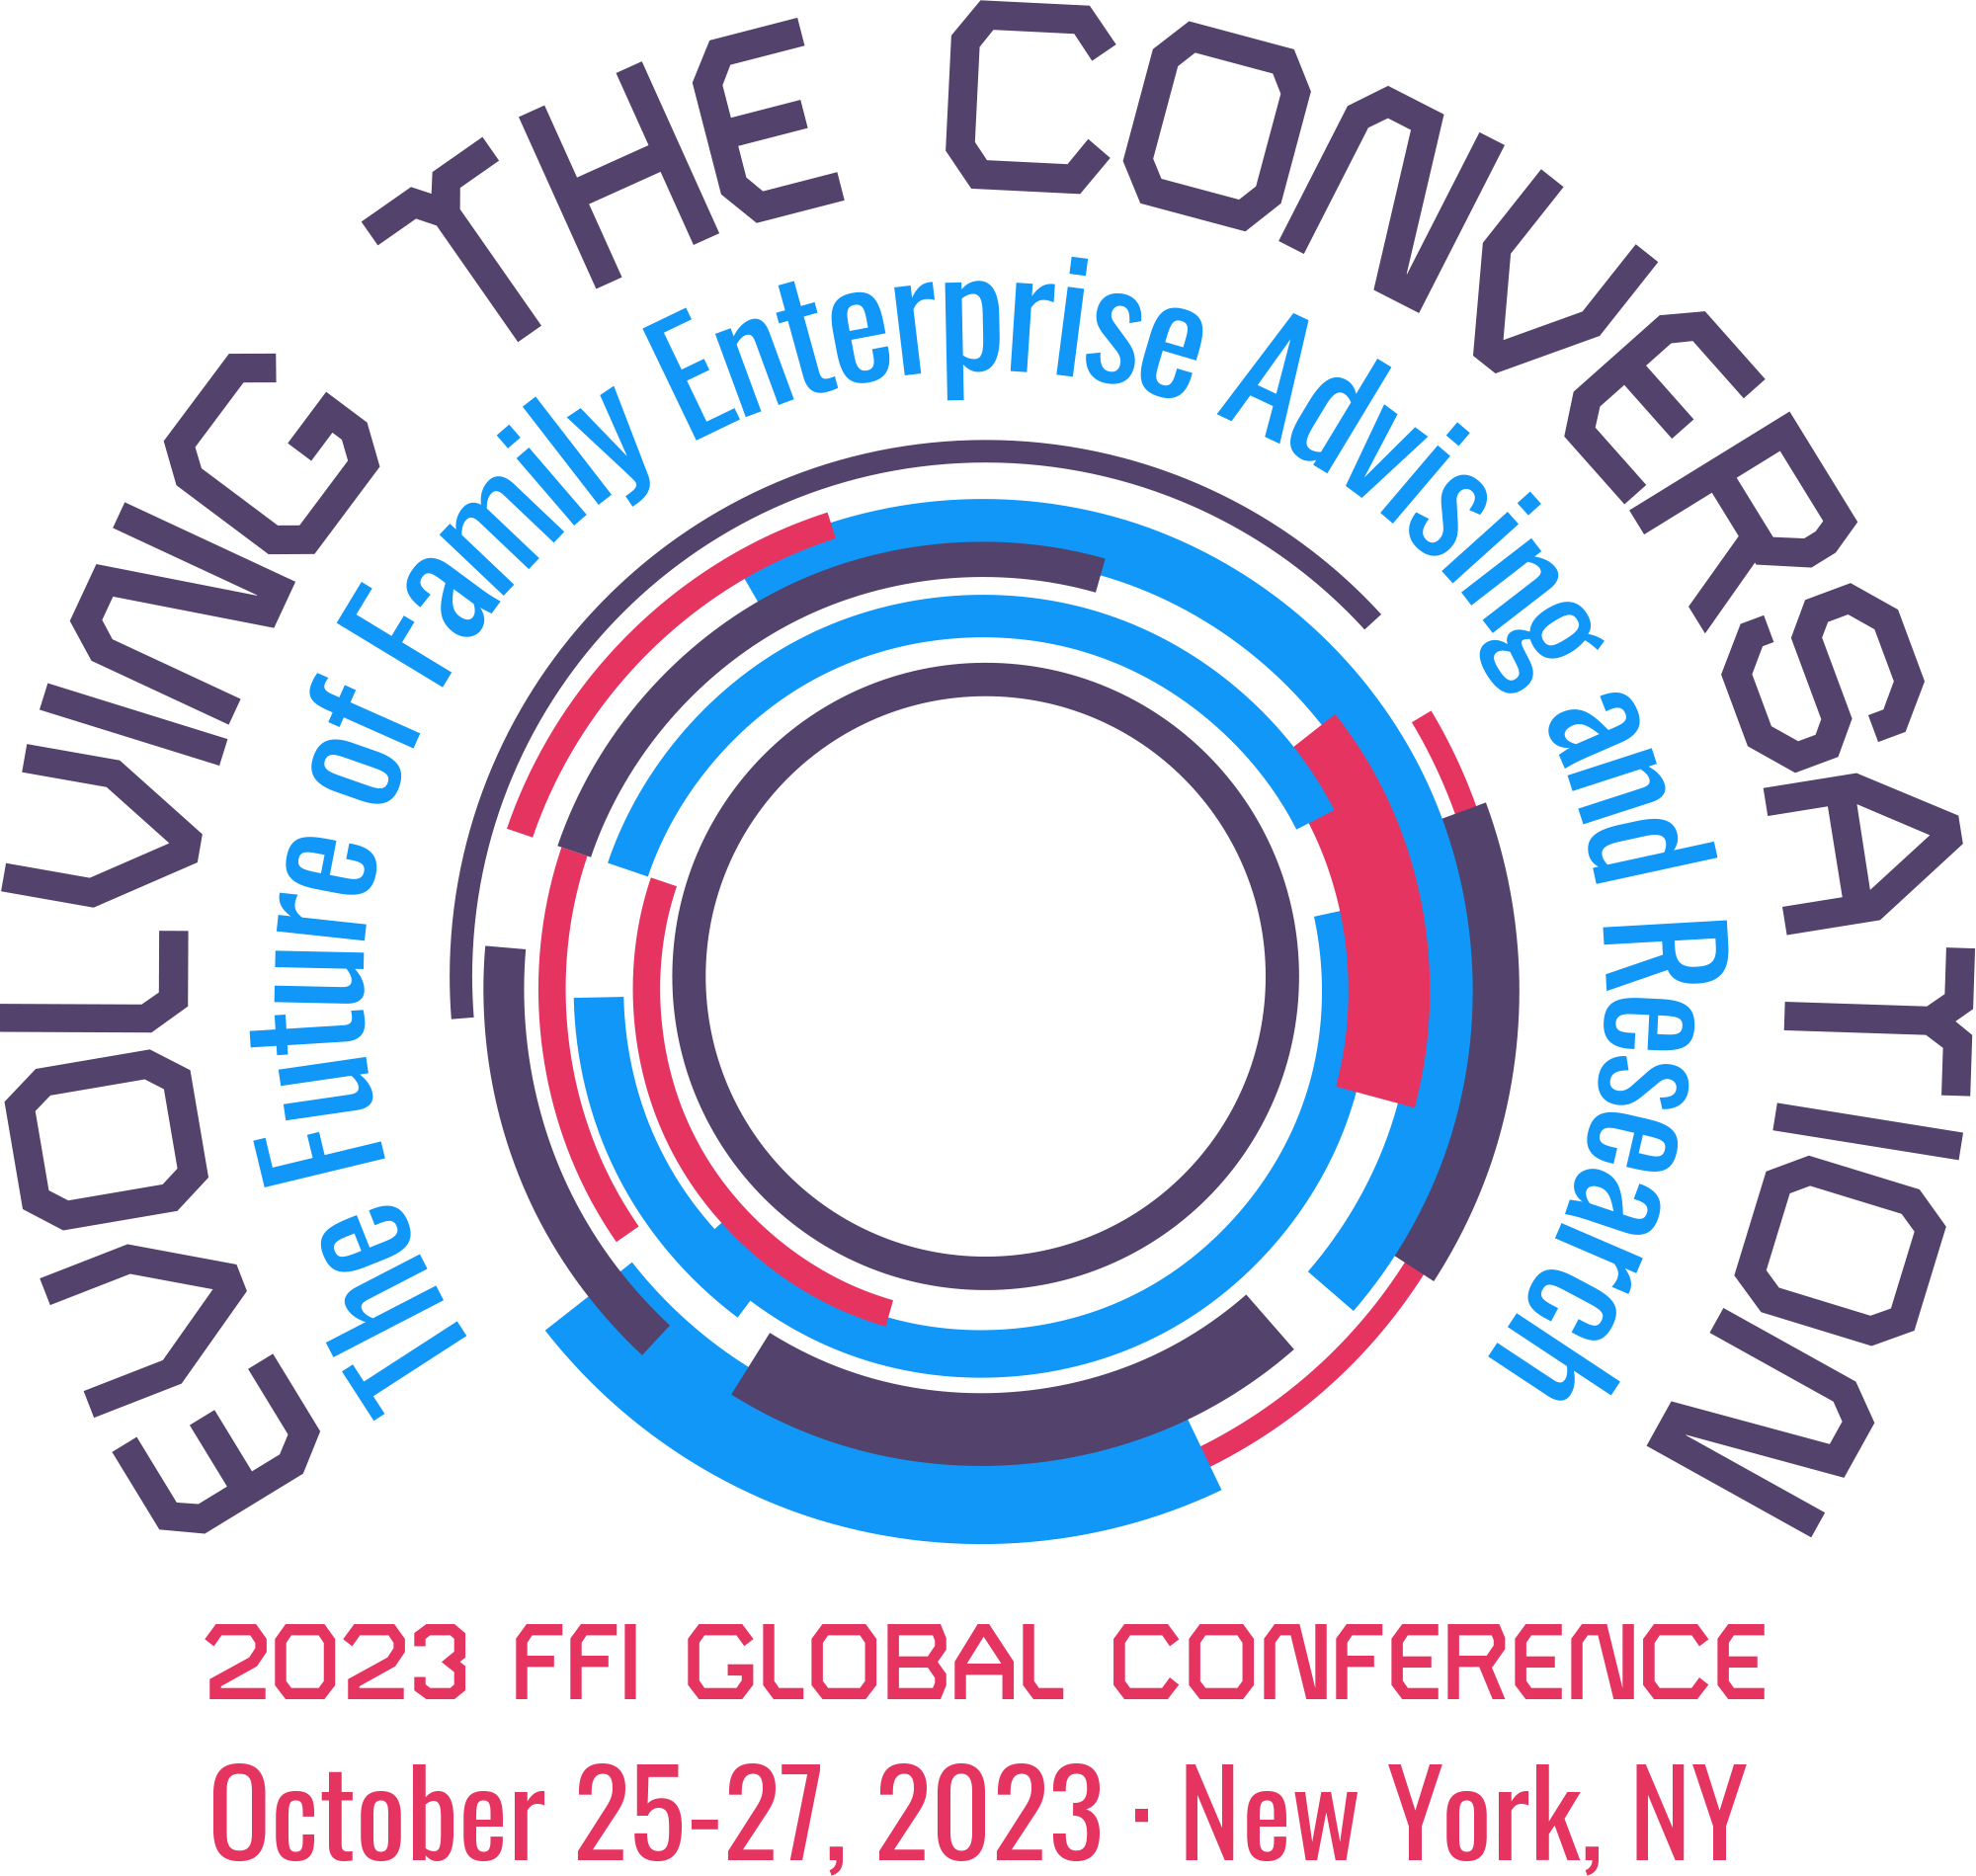 2023 FFI Global Conference - Evolving the Conversation: The future of family enterprise advising and research